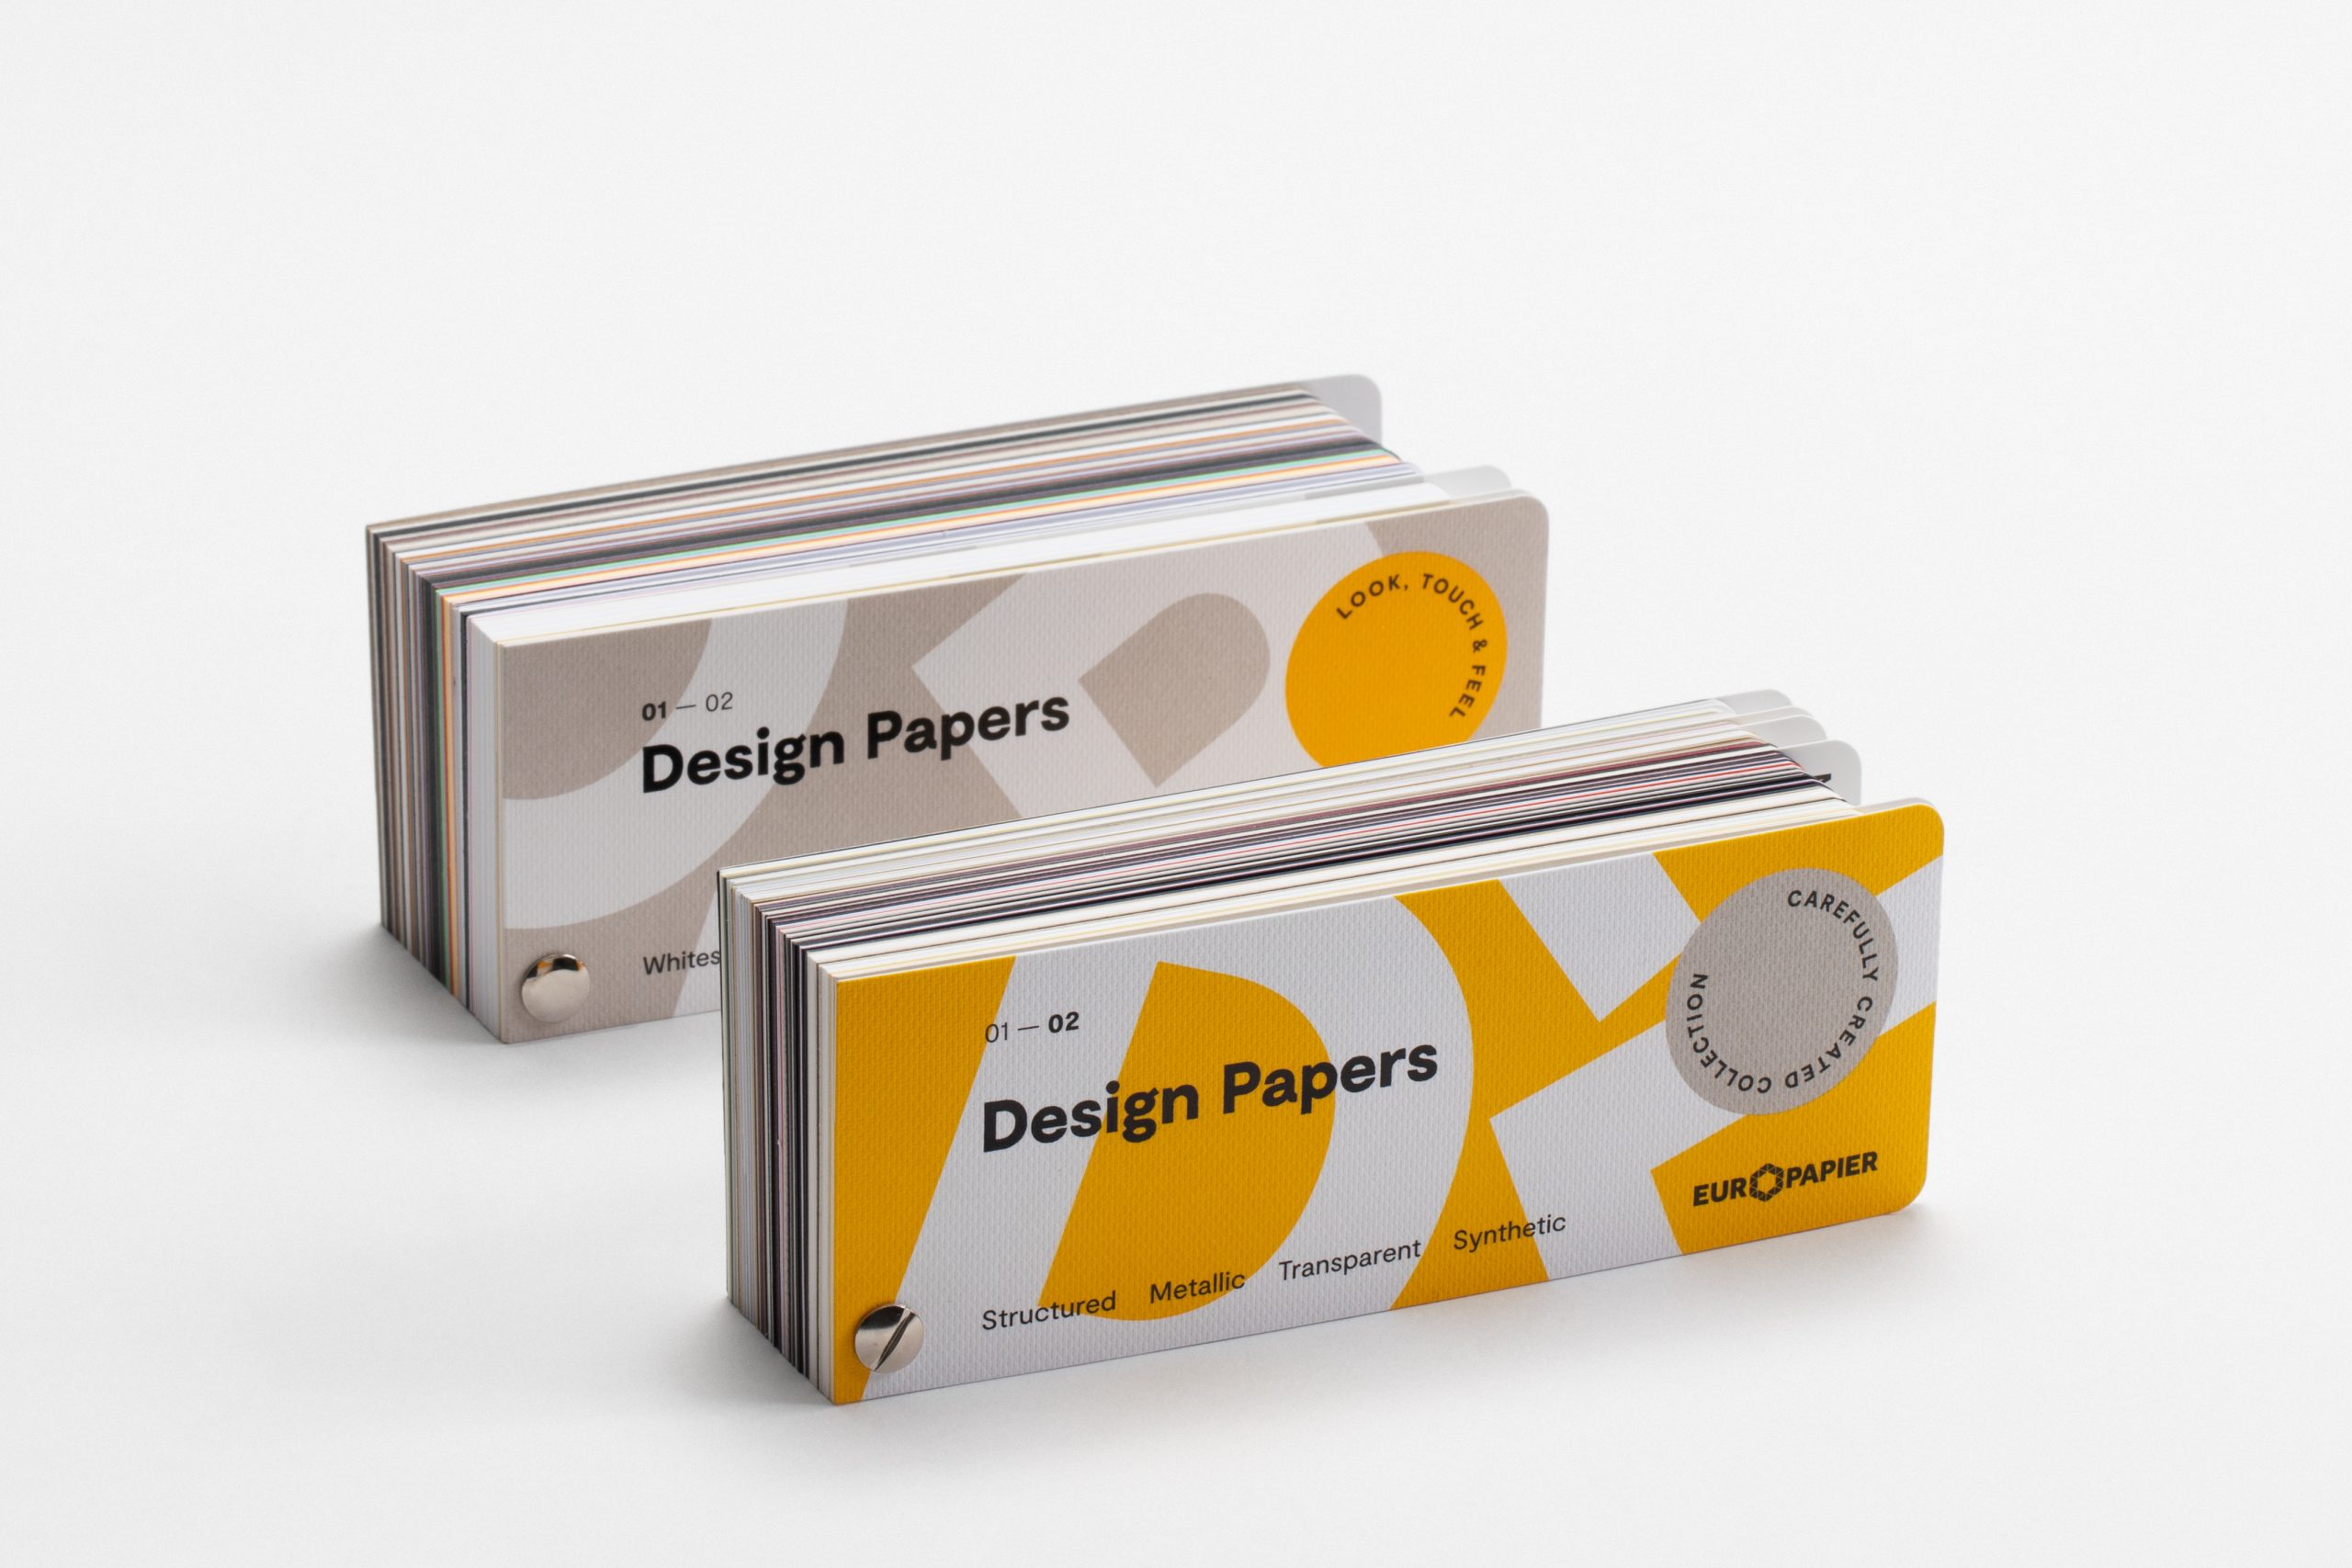 Europapier’s new Design Collection has arrived!